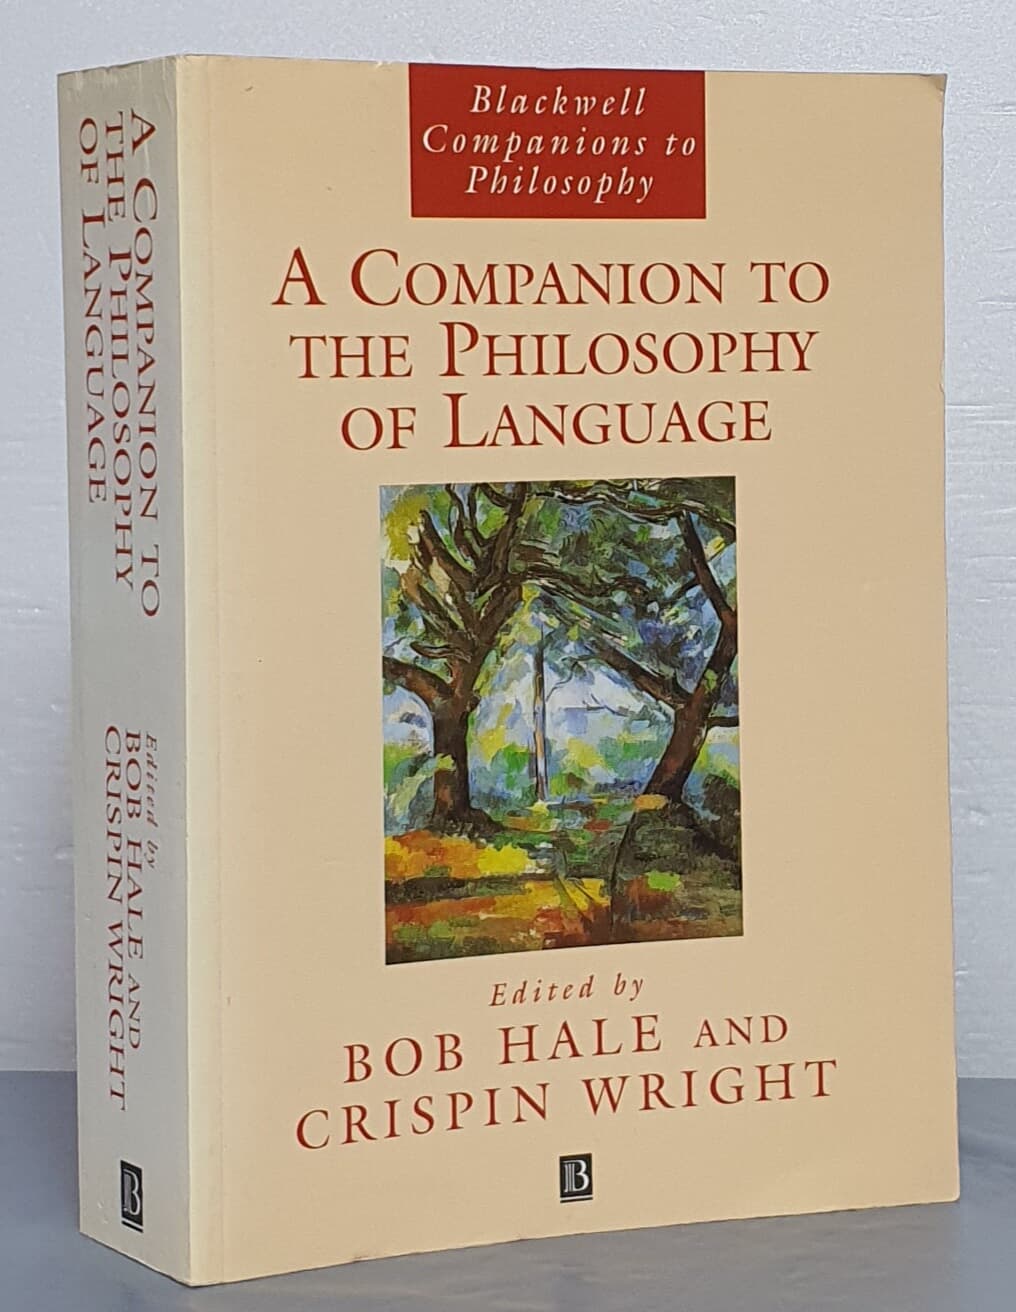 A Companion to the Philosophy of Language 